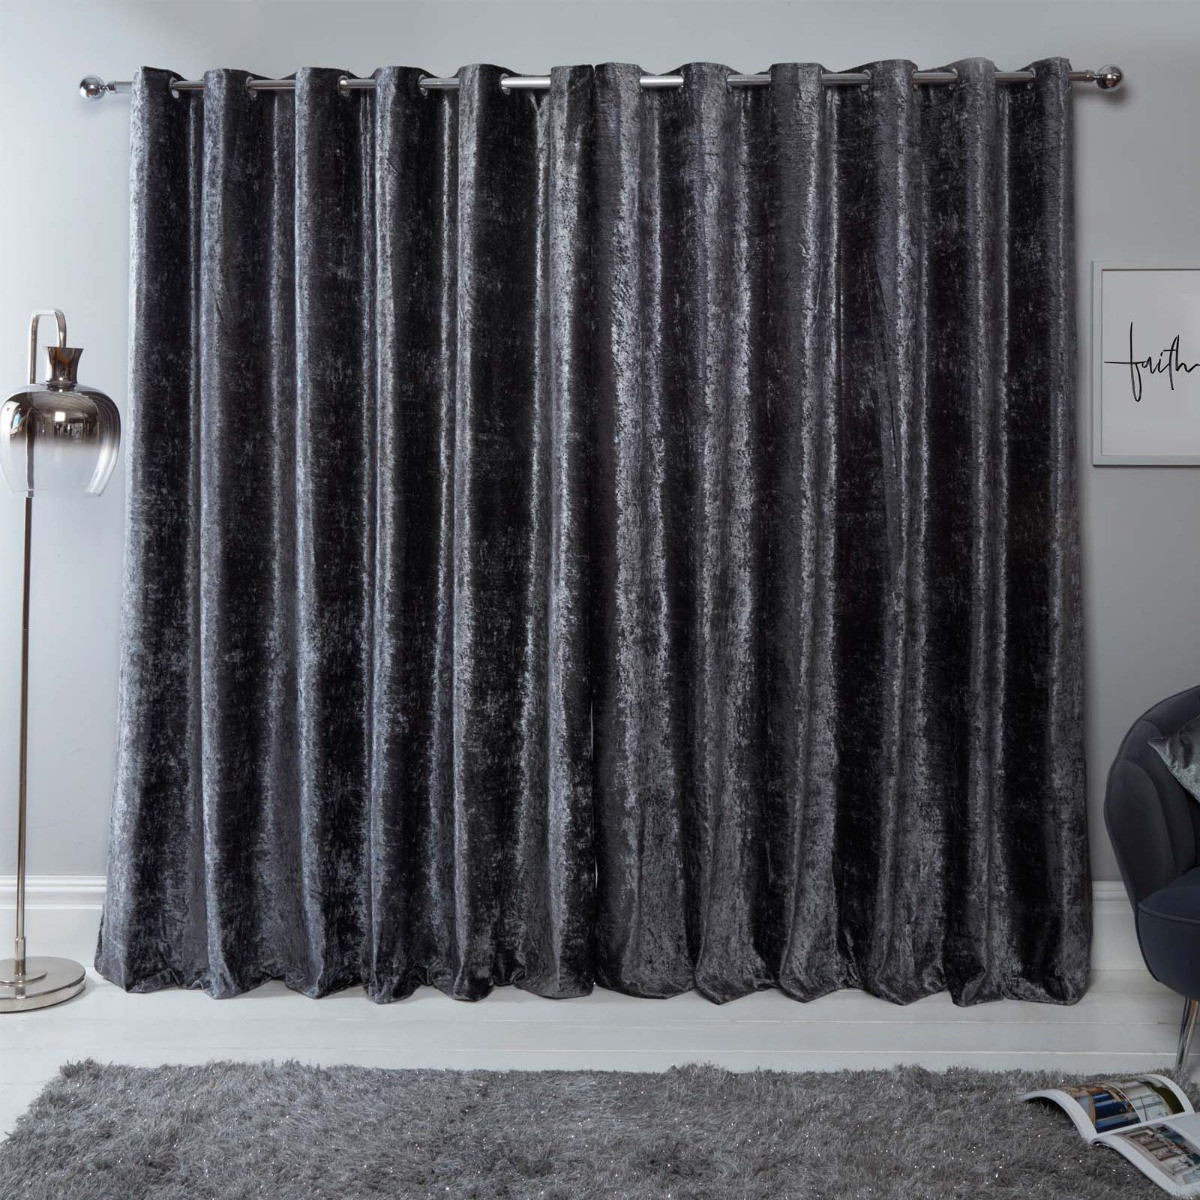 Sienna Home Crushed Velvet Eyelet Curtains - Charcoal Grey 90" x 54">